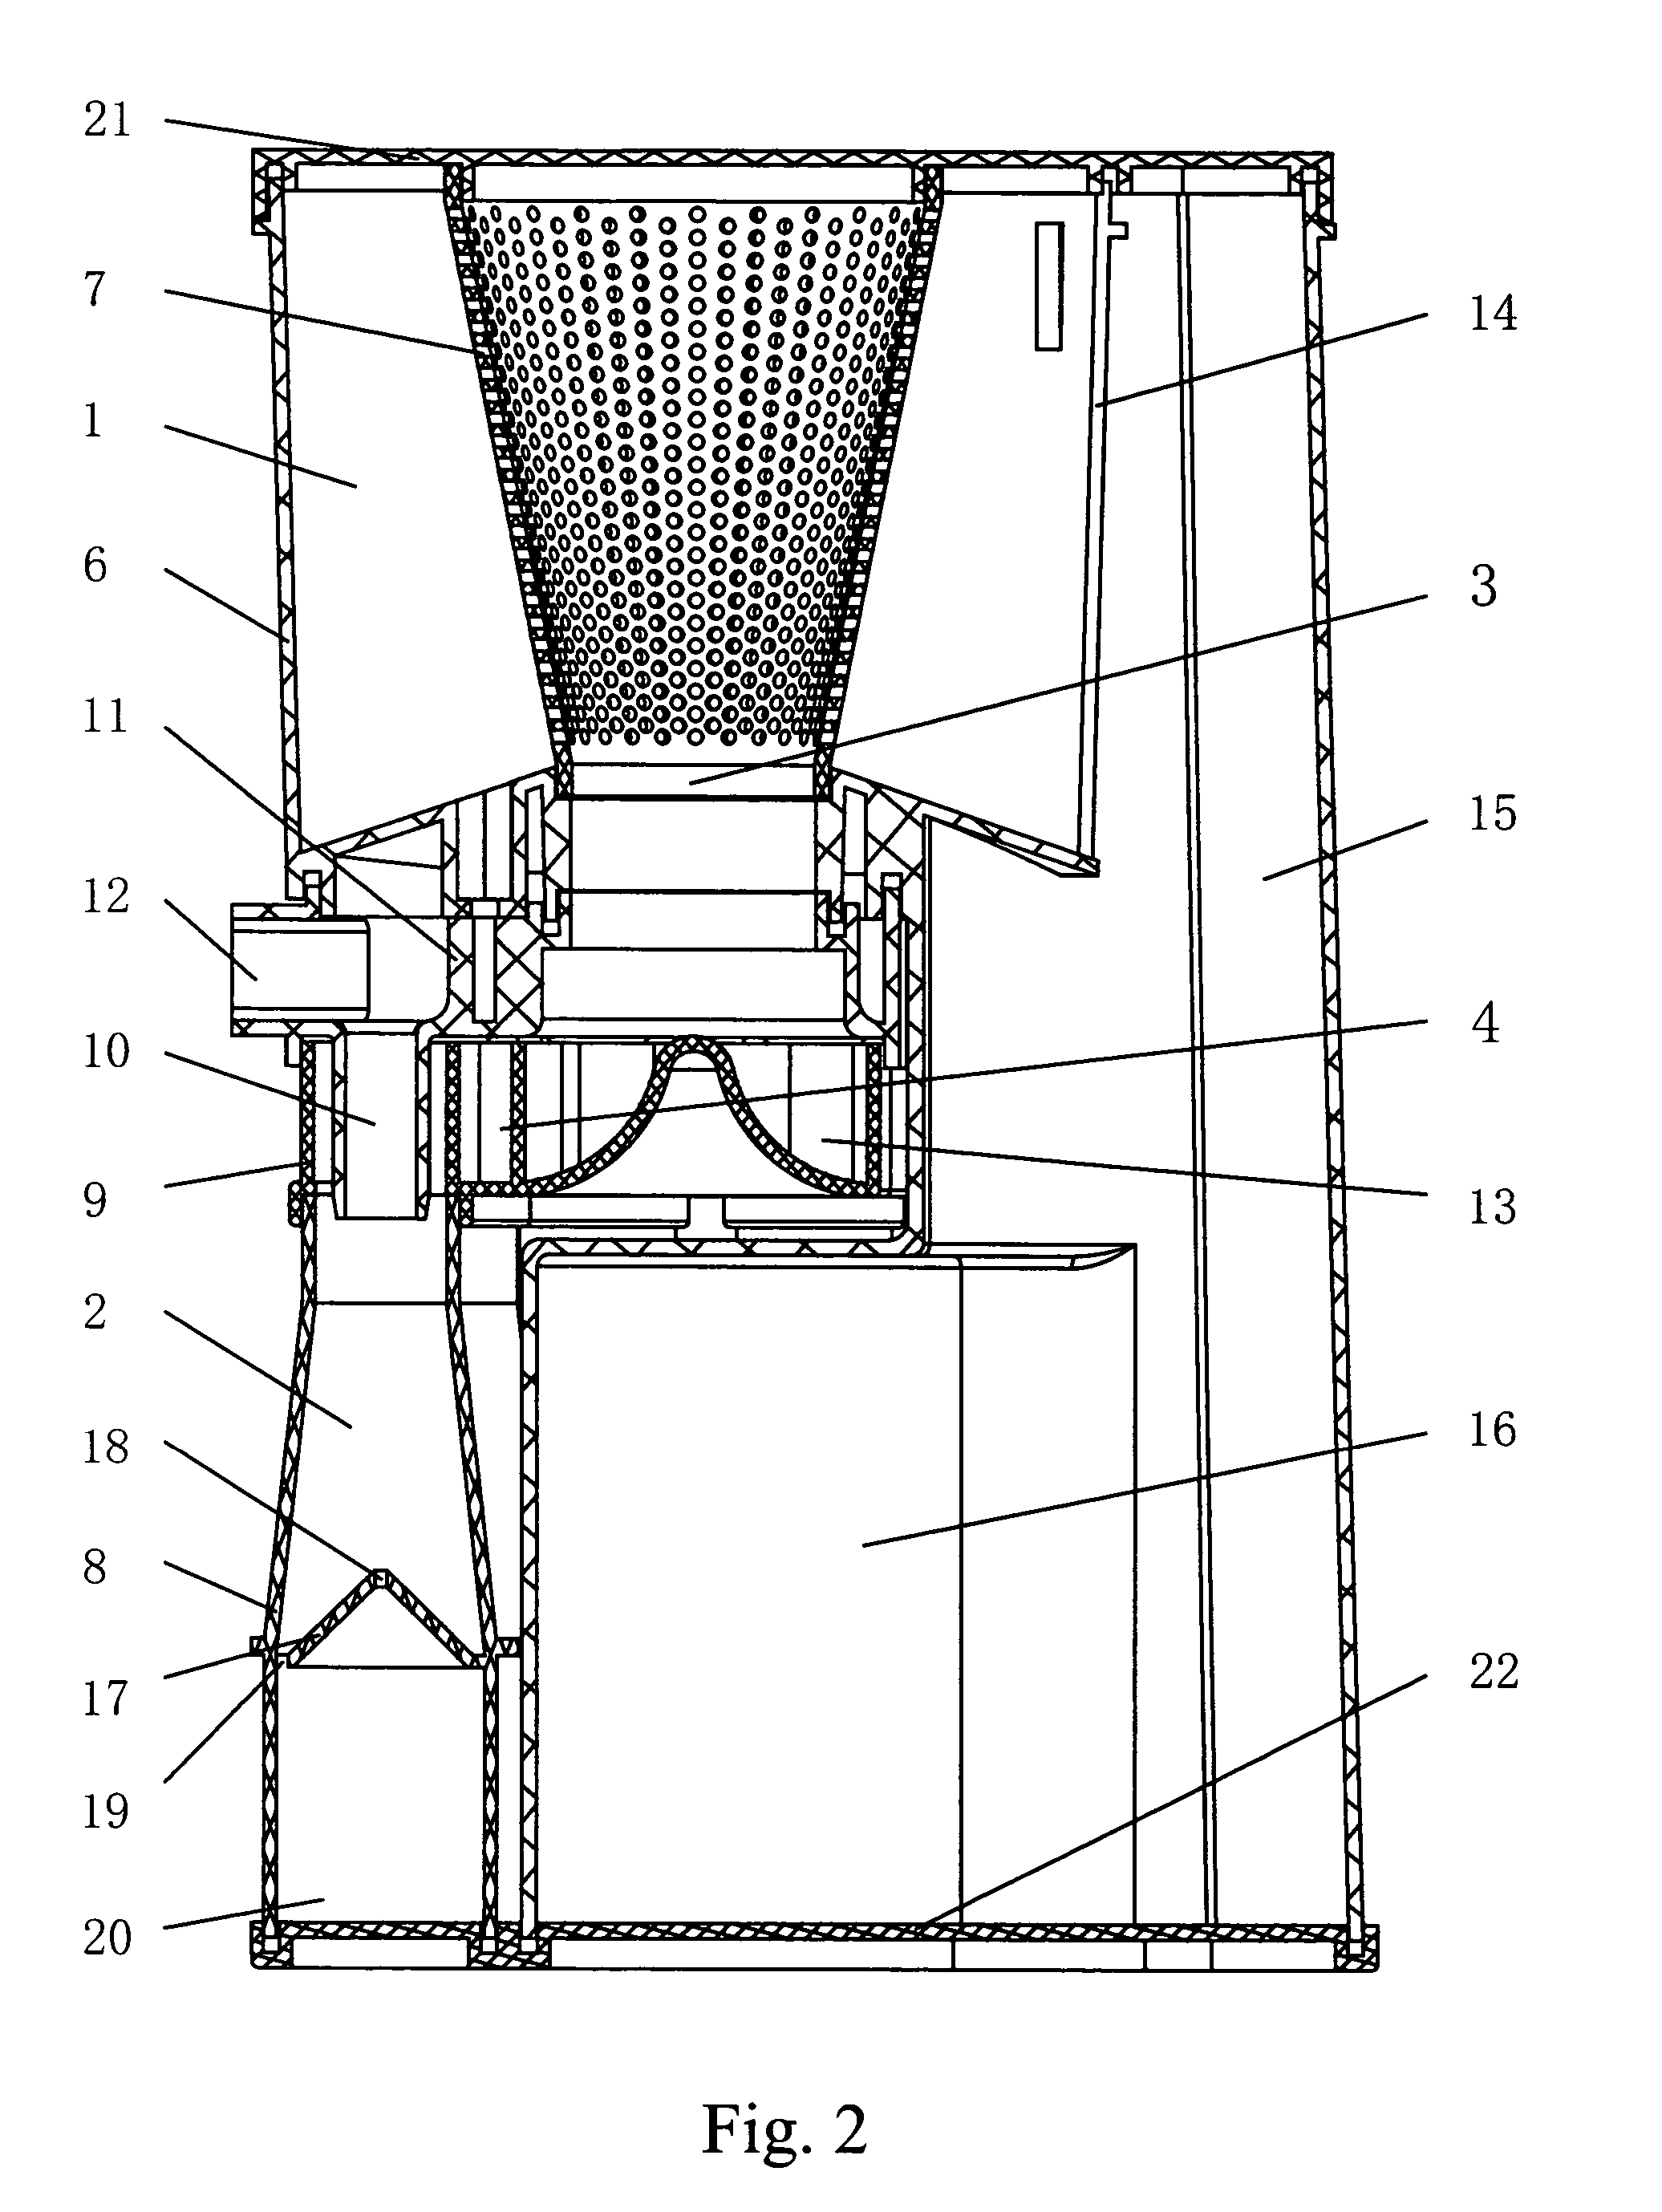 Subsection dedusting device for a vacuum cleaner